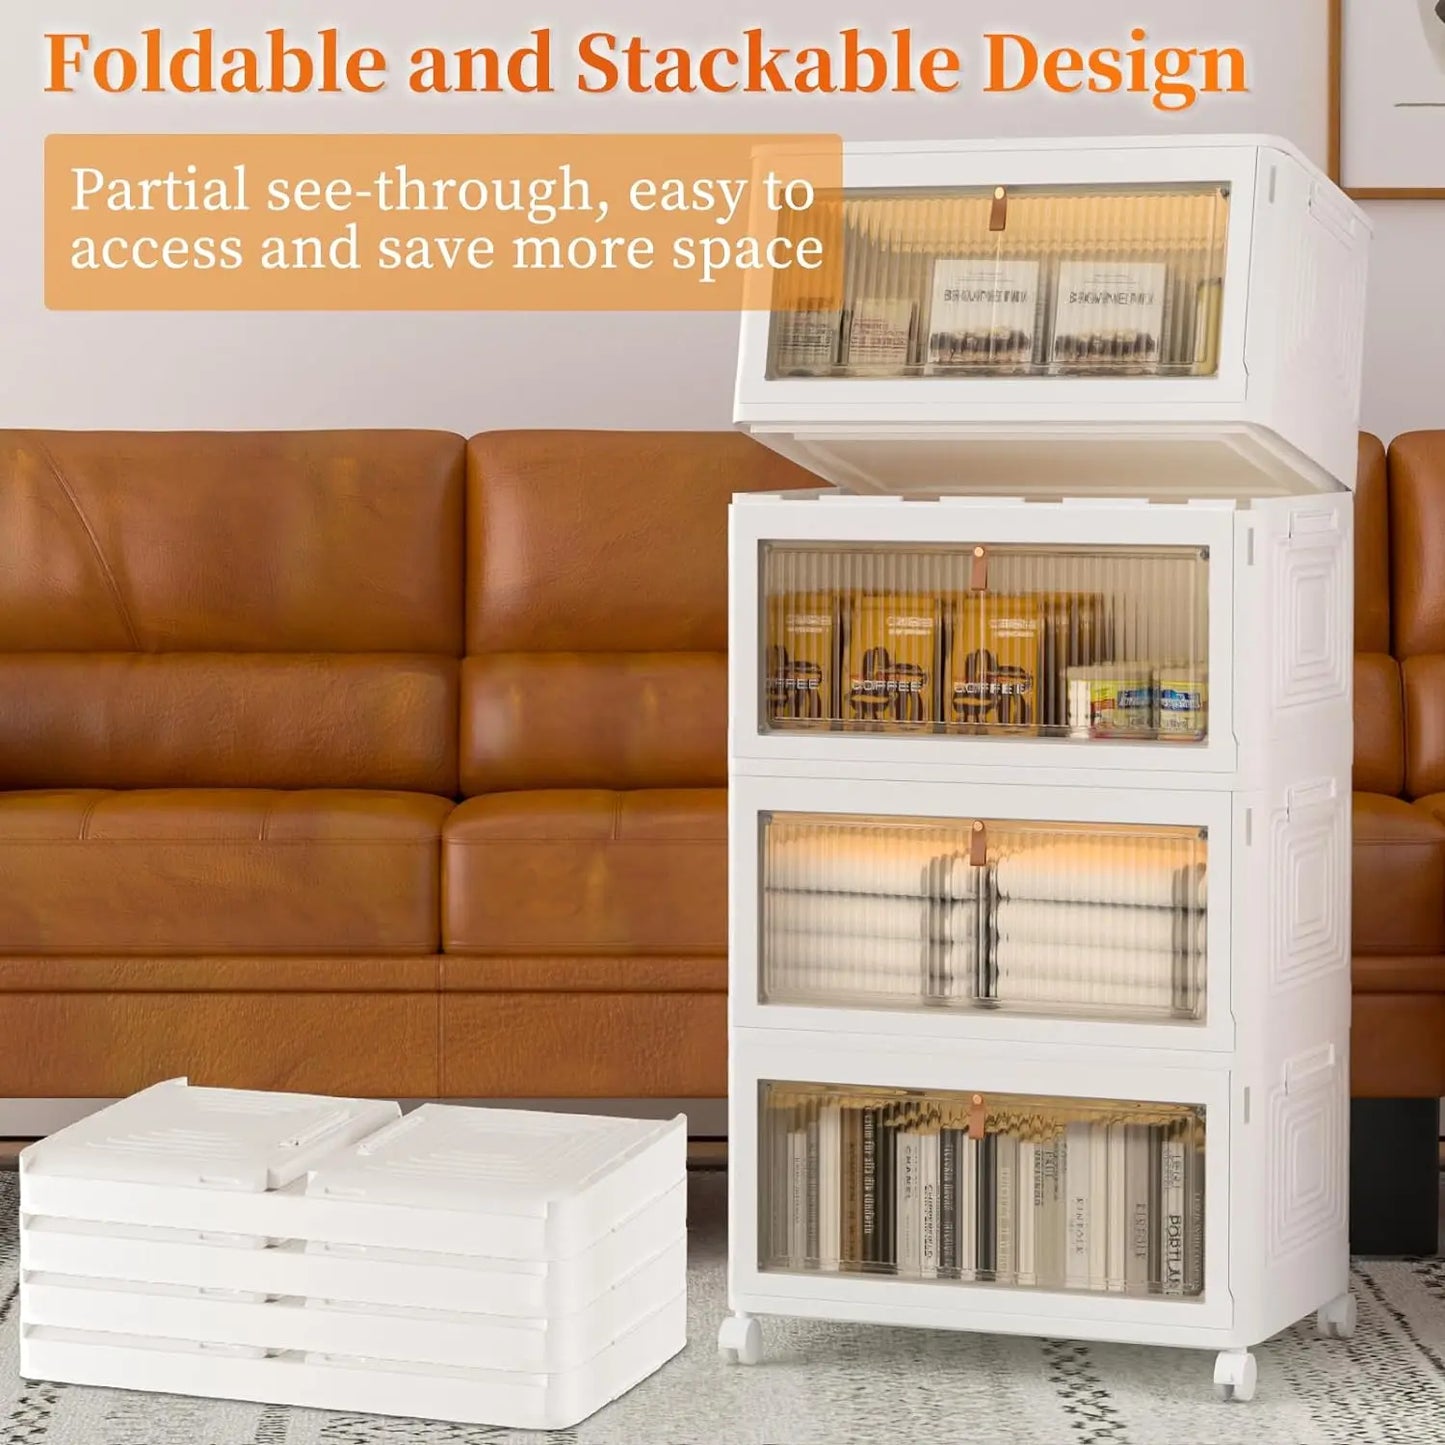 4 Tier Stackable Storage Containers with Wheels and Lids